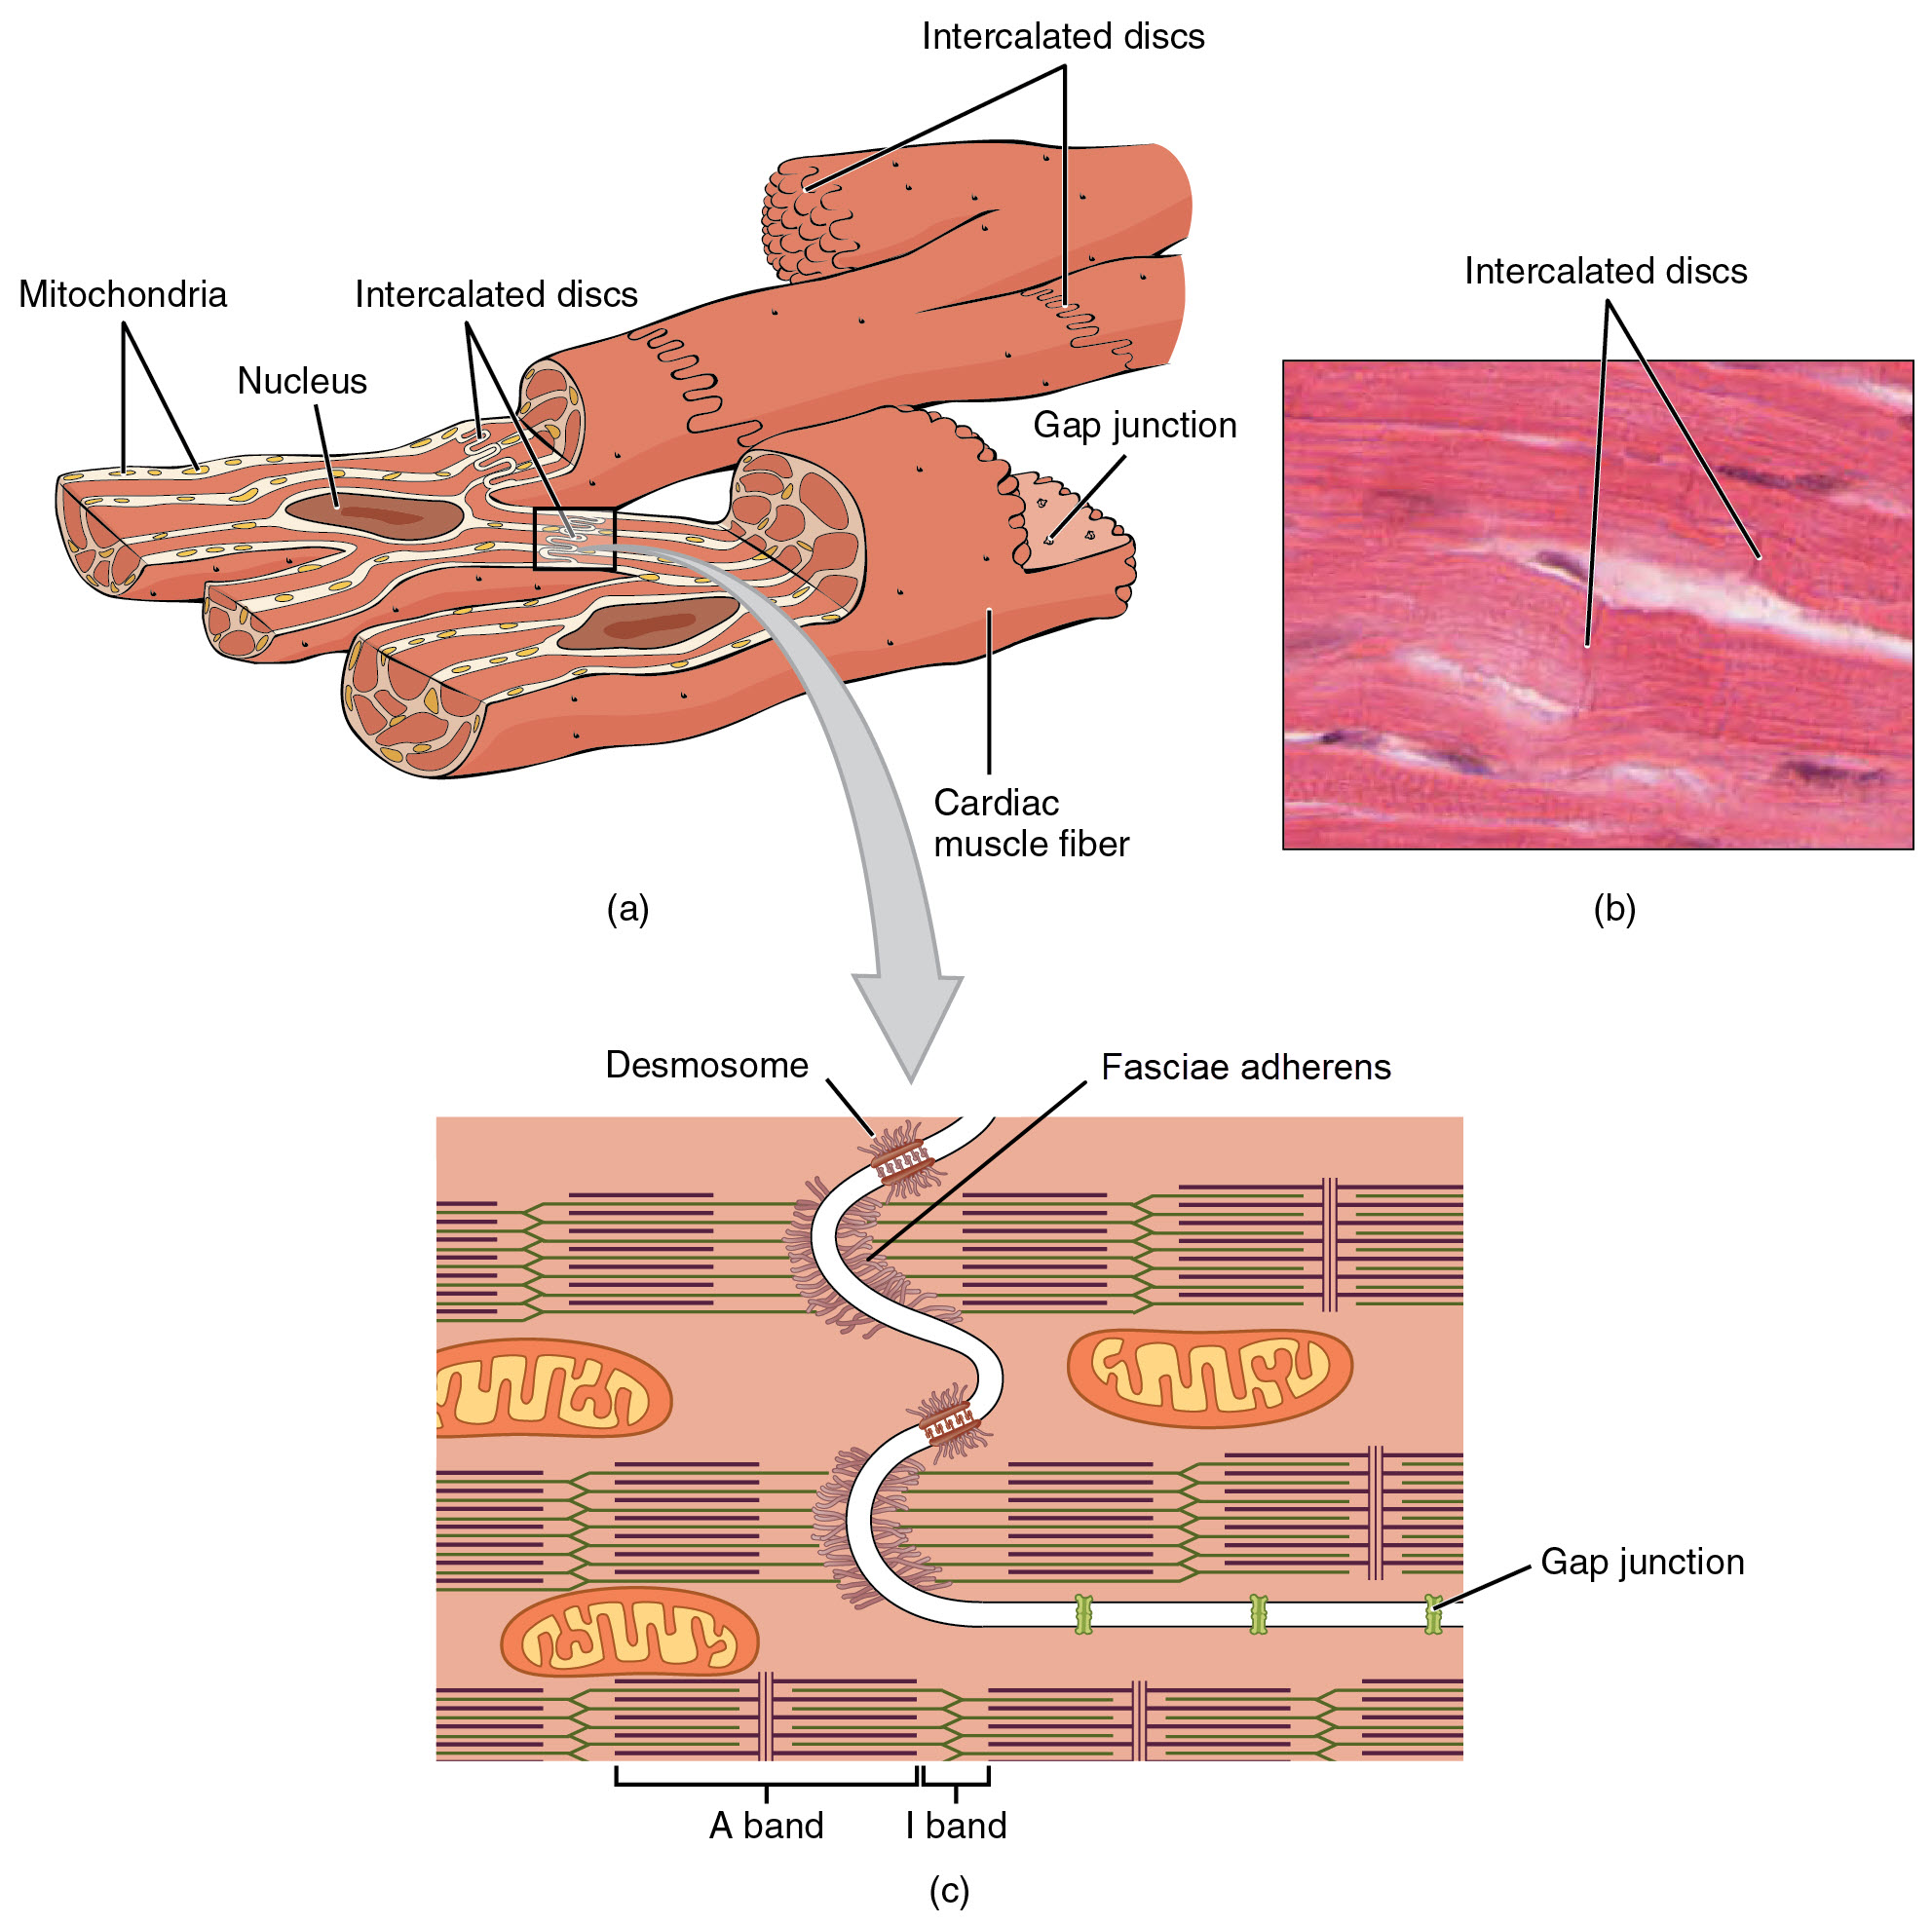 Cardiac muscle contains sarcomeres with an arrangement that causes visible striations. Intercalated discs connect adjacent cardiac muscle cells and feature desmosomes, fasciae adherens, and gap junctions.